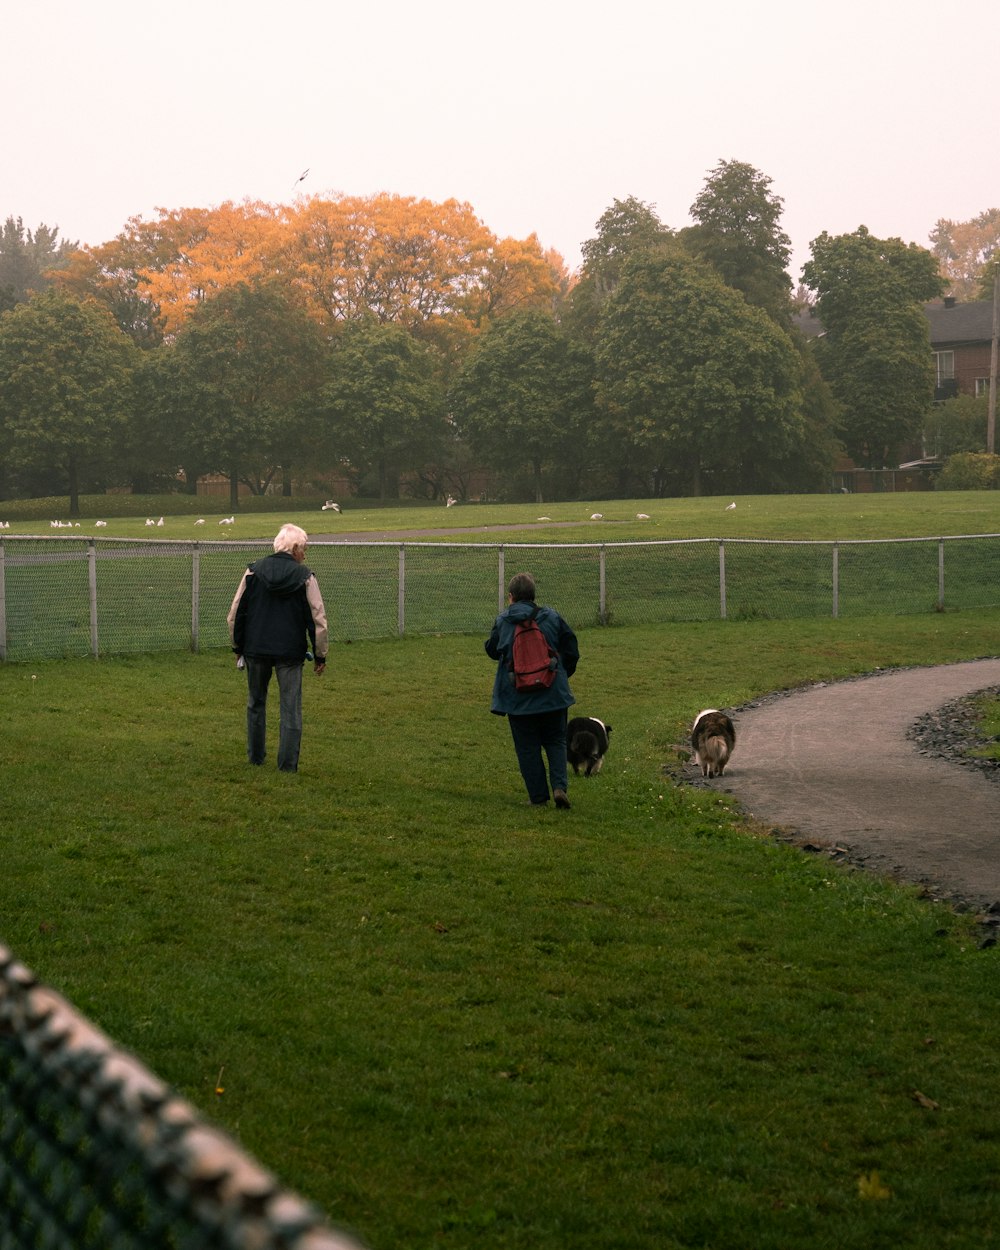 two people walking a dog on a grass field